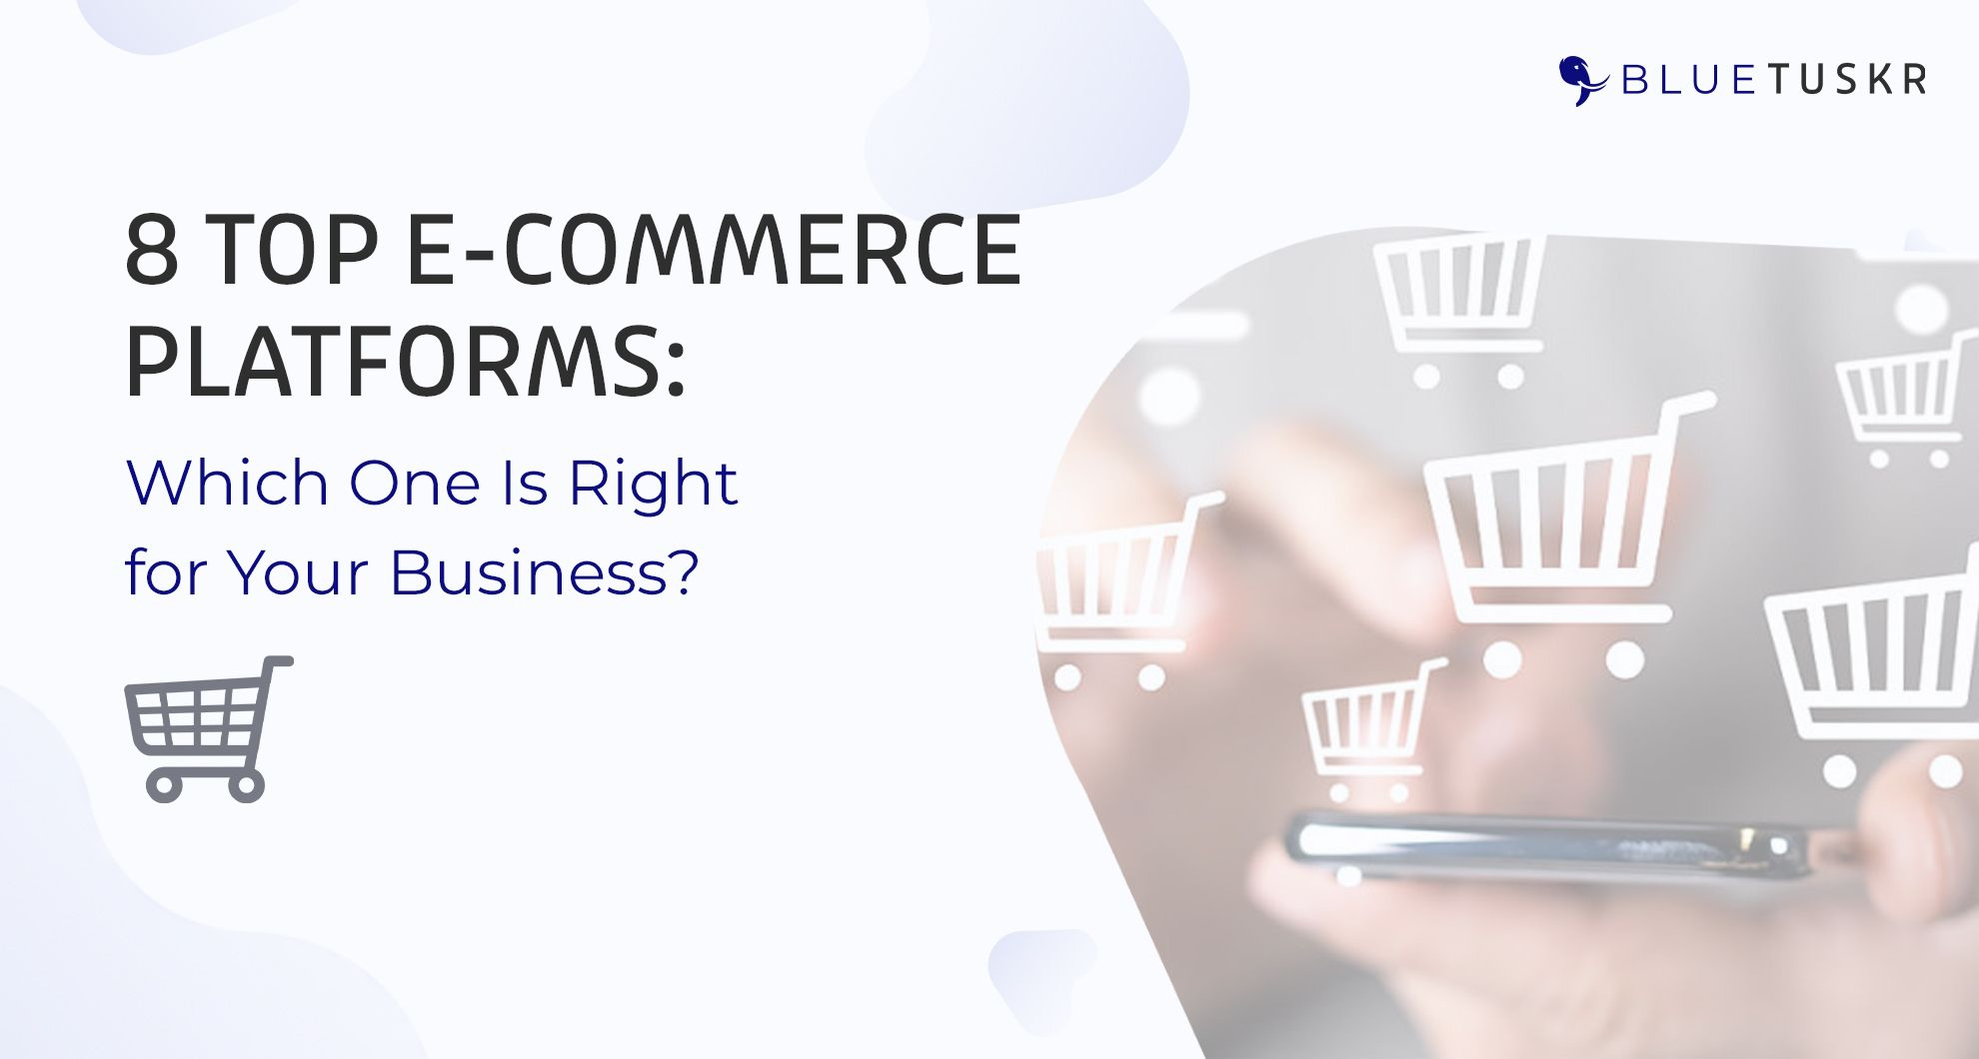 8 Top E-commerce Platforms: Which One Is Right for Your Business?